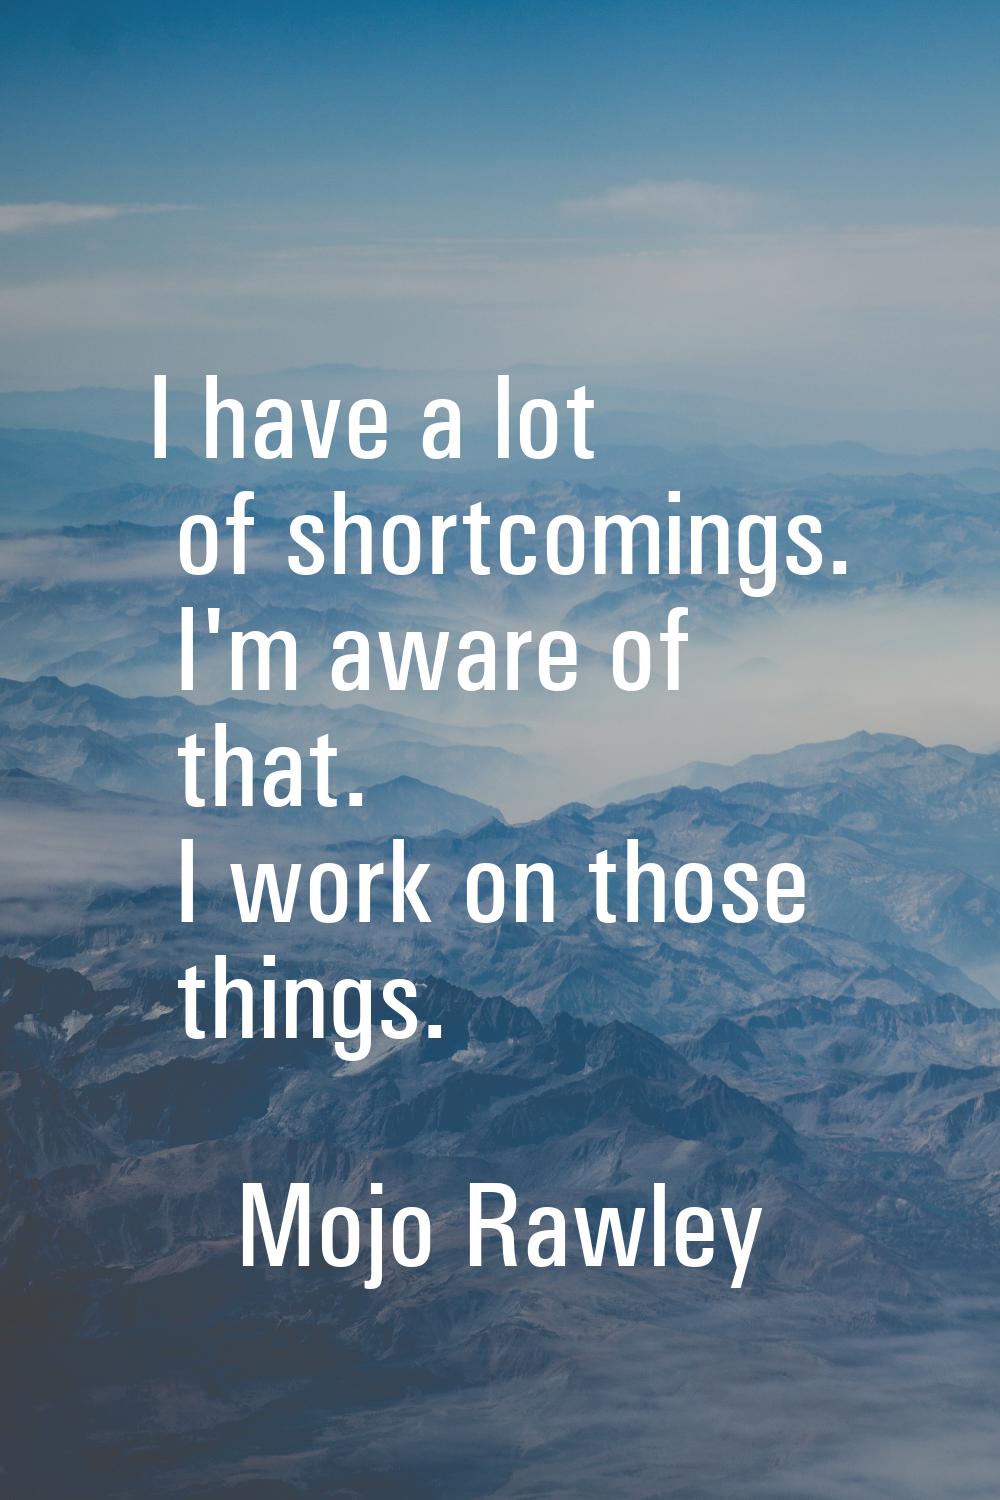 I have a lot of shortcomings. I'm aware of that. I work on those things.